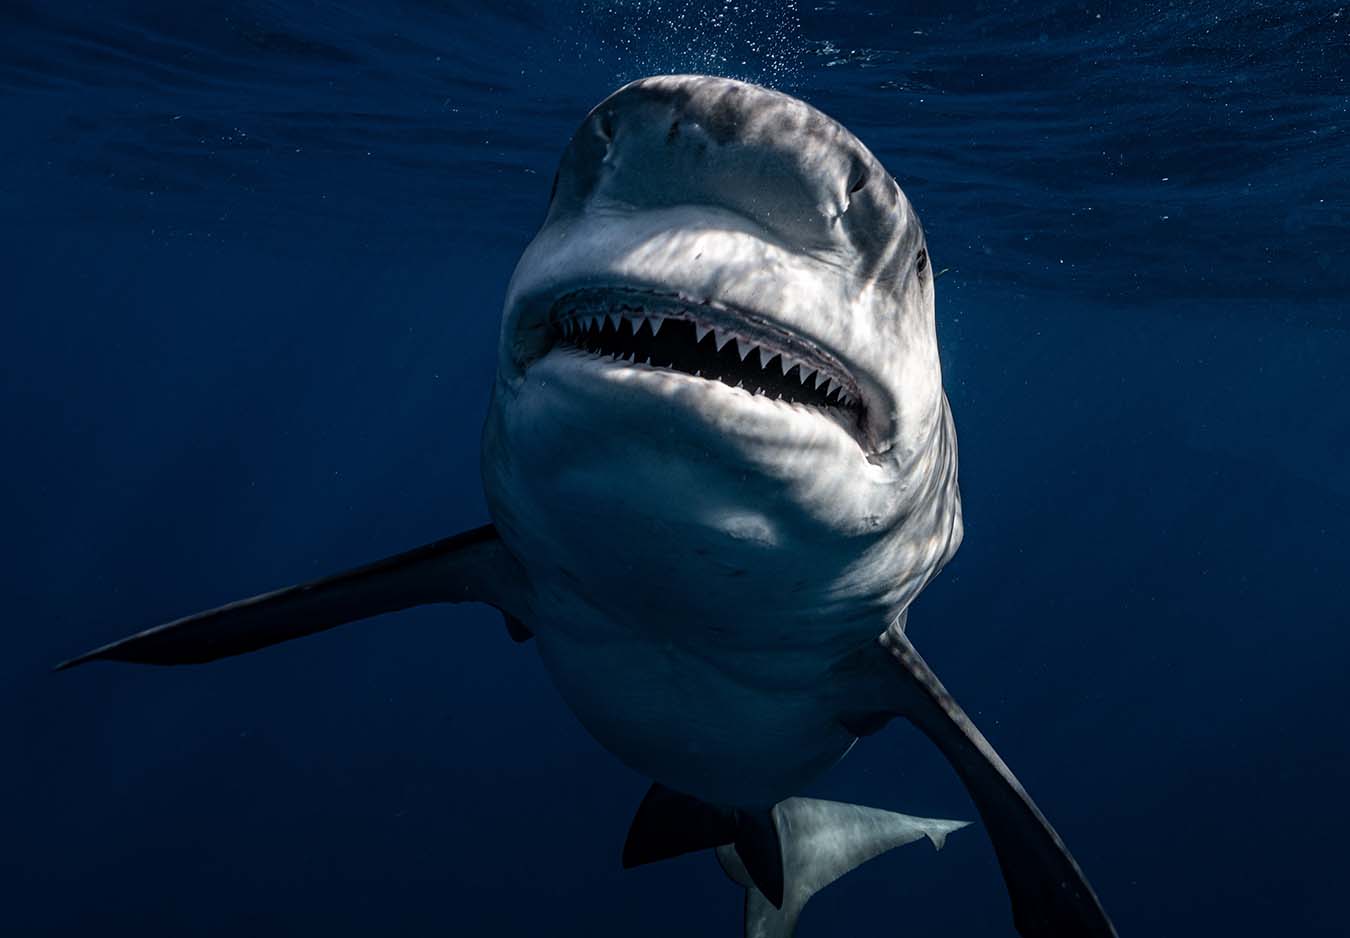 Closeup of a giant shark showing it's teeth